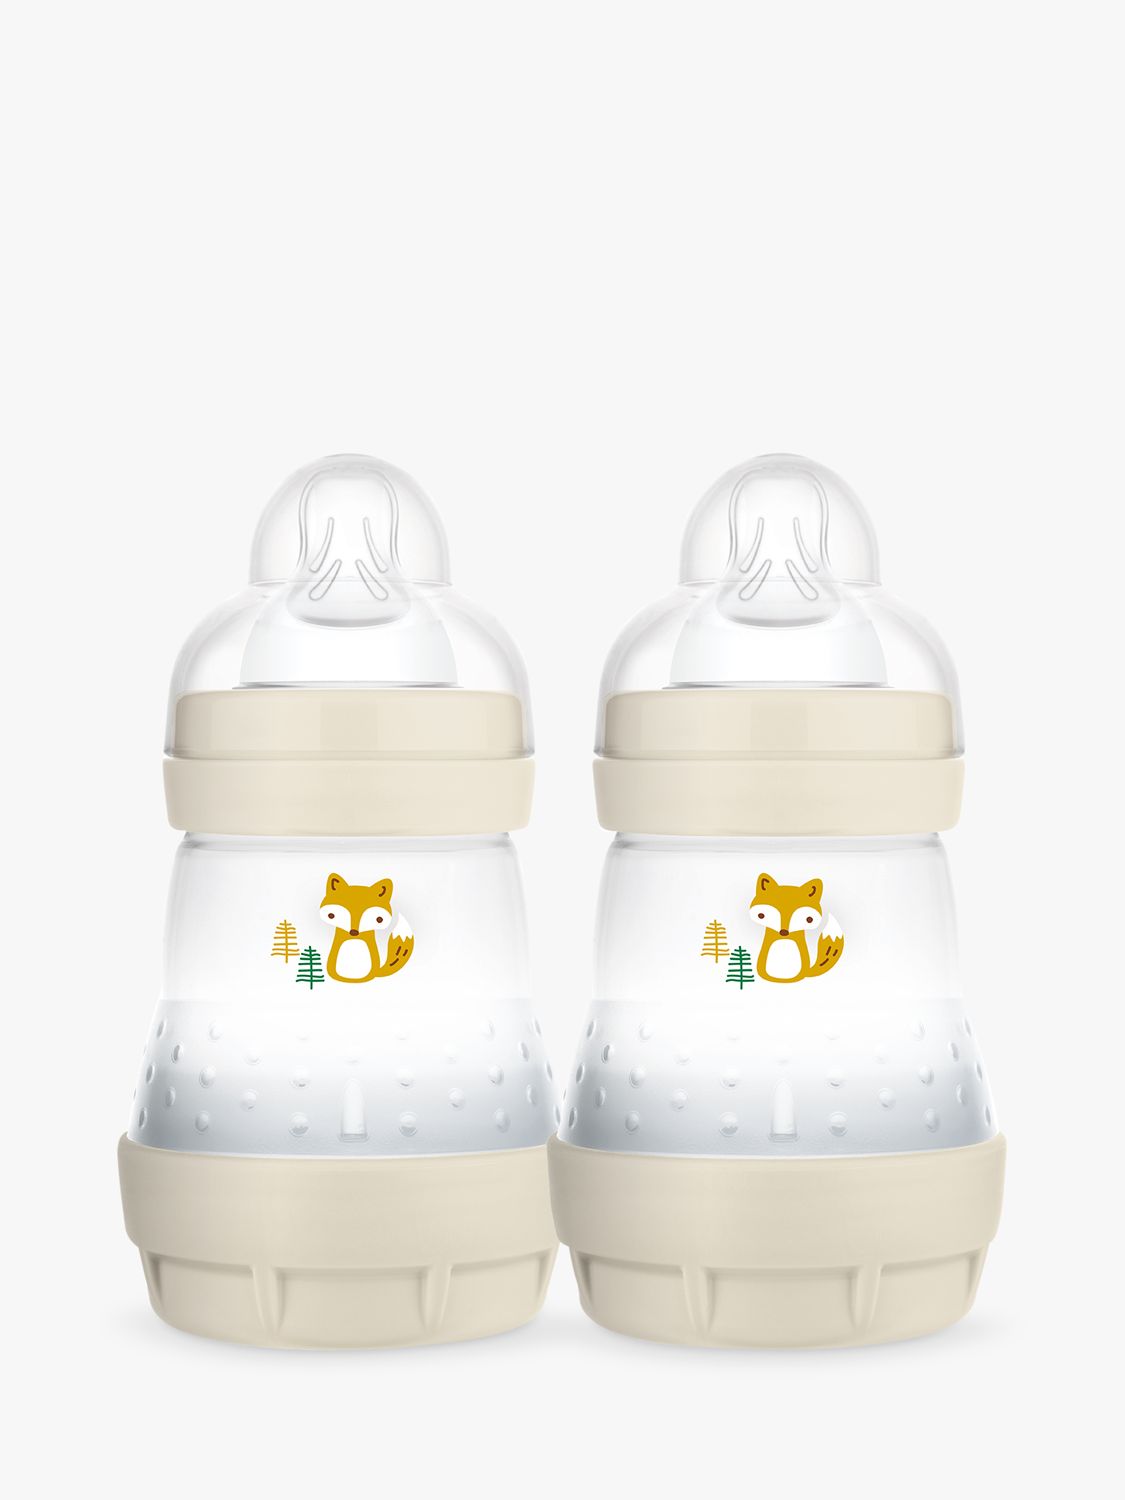  MAM Feed & Soothe Bottle & Pacifier Gift Set, Unisex, 0+  Months, 6-Count : Mam Bottle : Baby